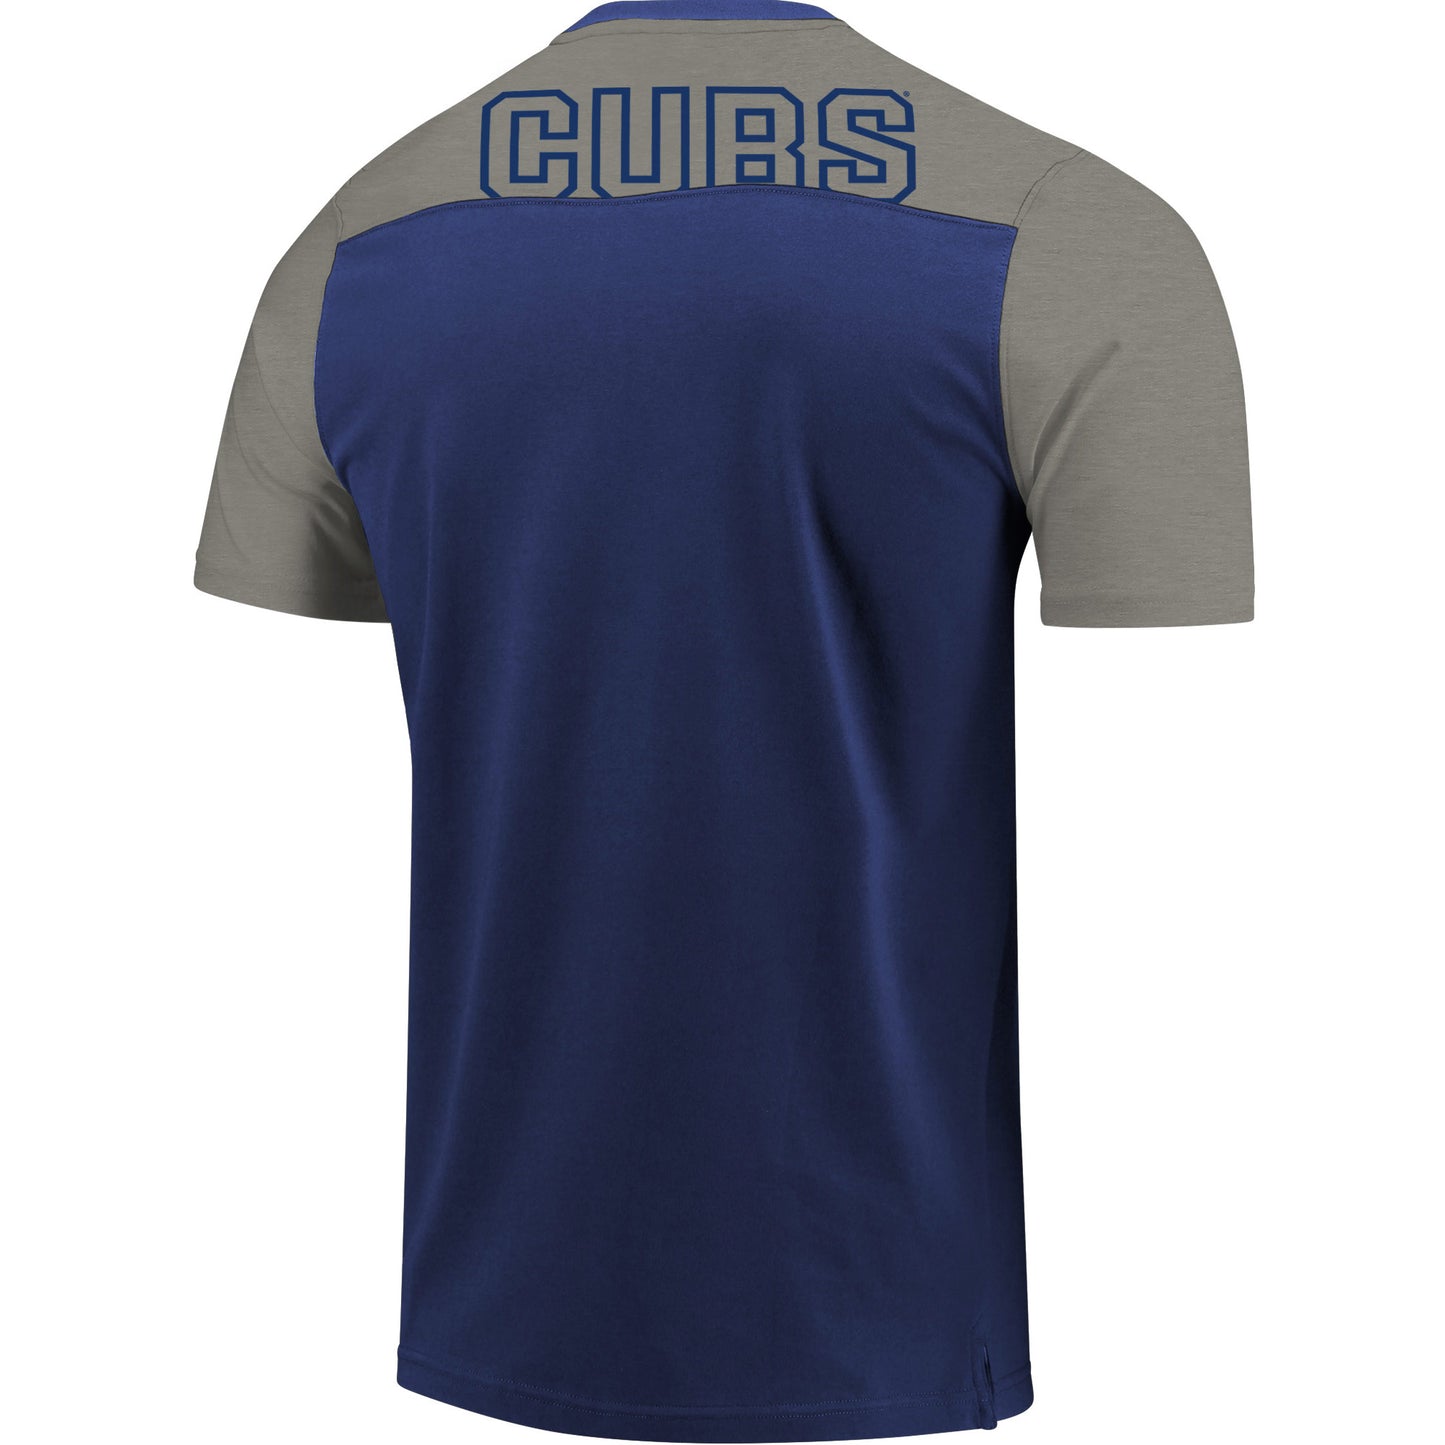 Men's Chicago Cubs Fanatics Branded Royal/Gray Iconic T-Shirt